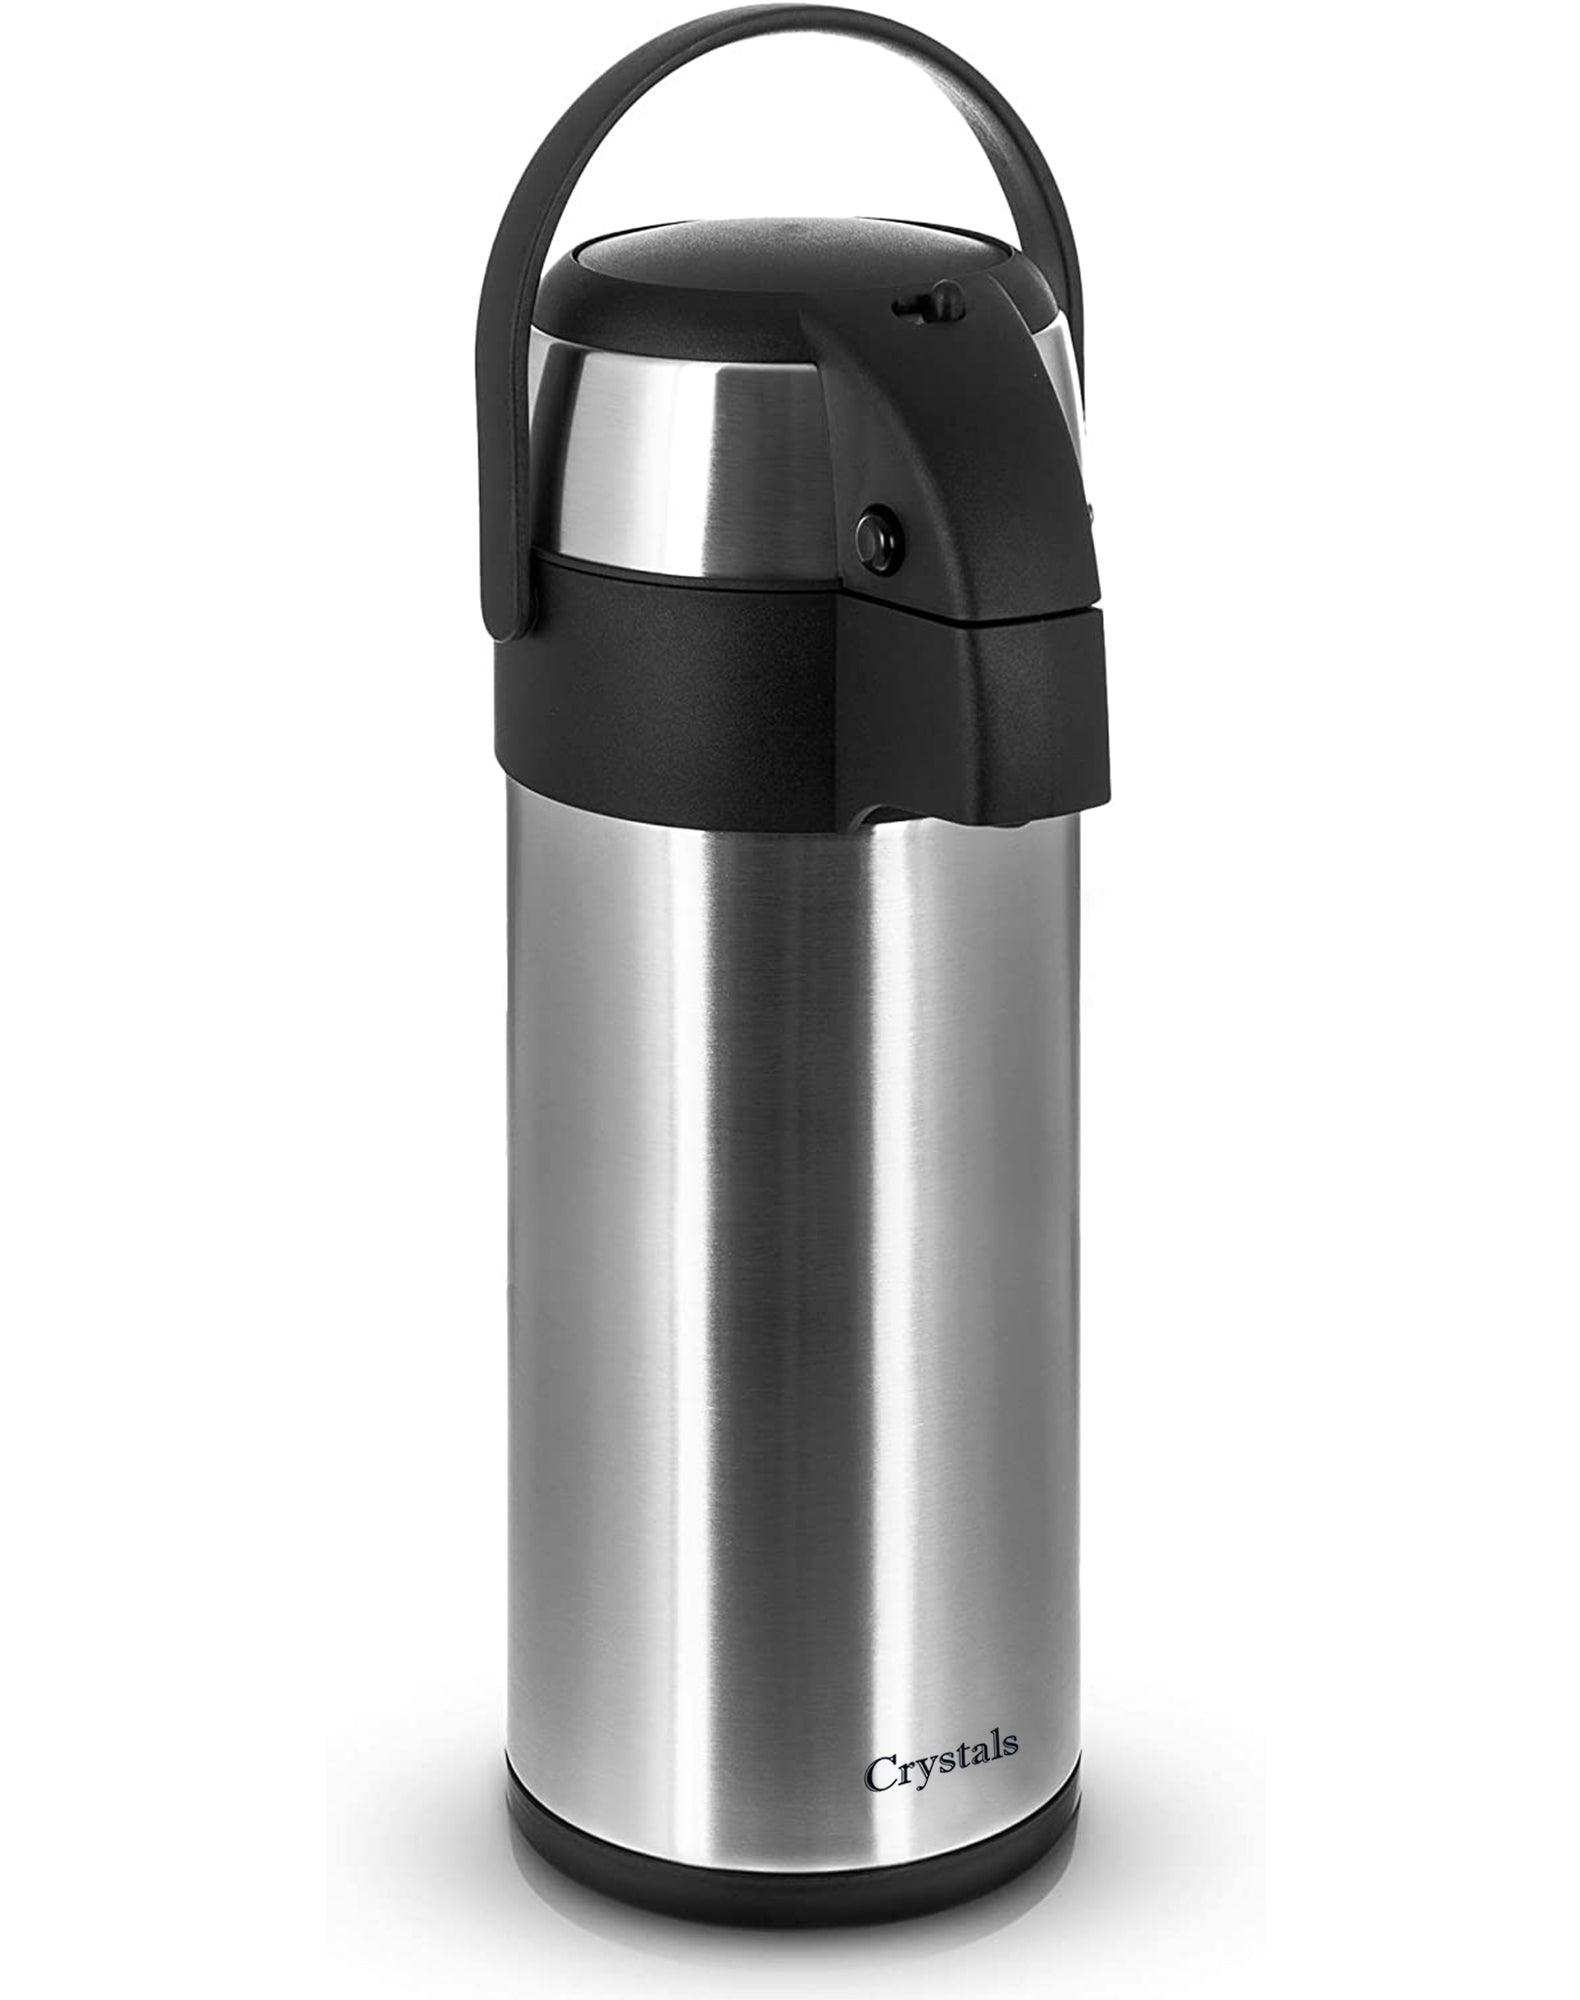 Tomakeit 3l Airport Stainless Steel thermos, Insulated Stainless